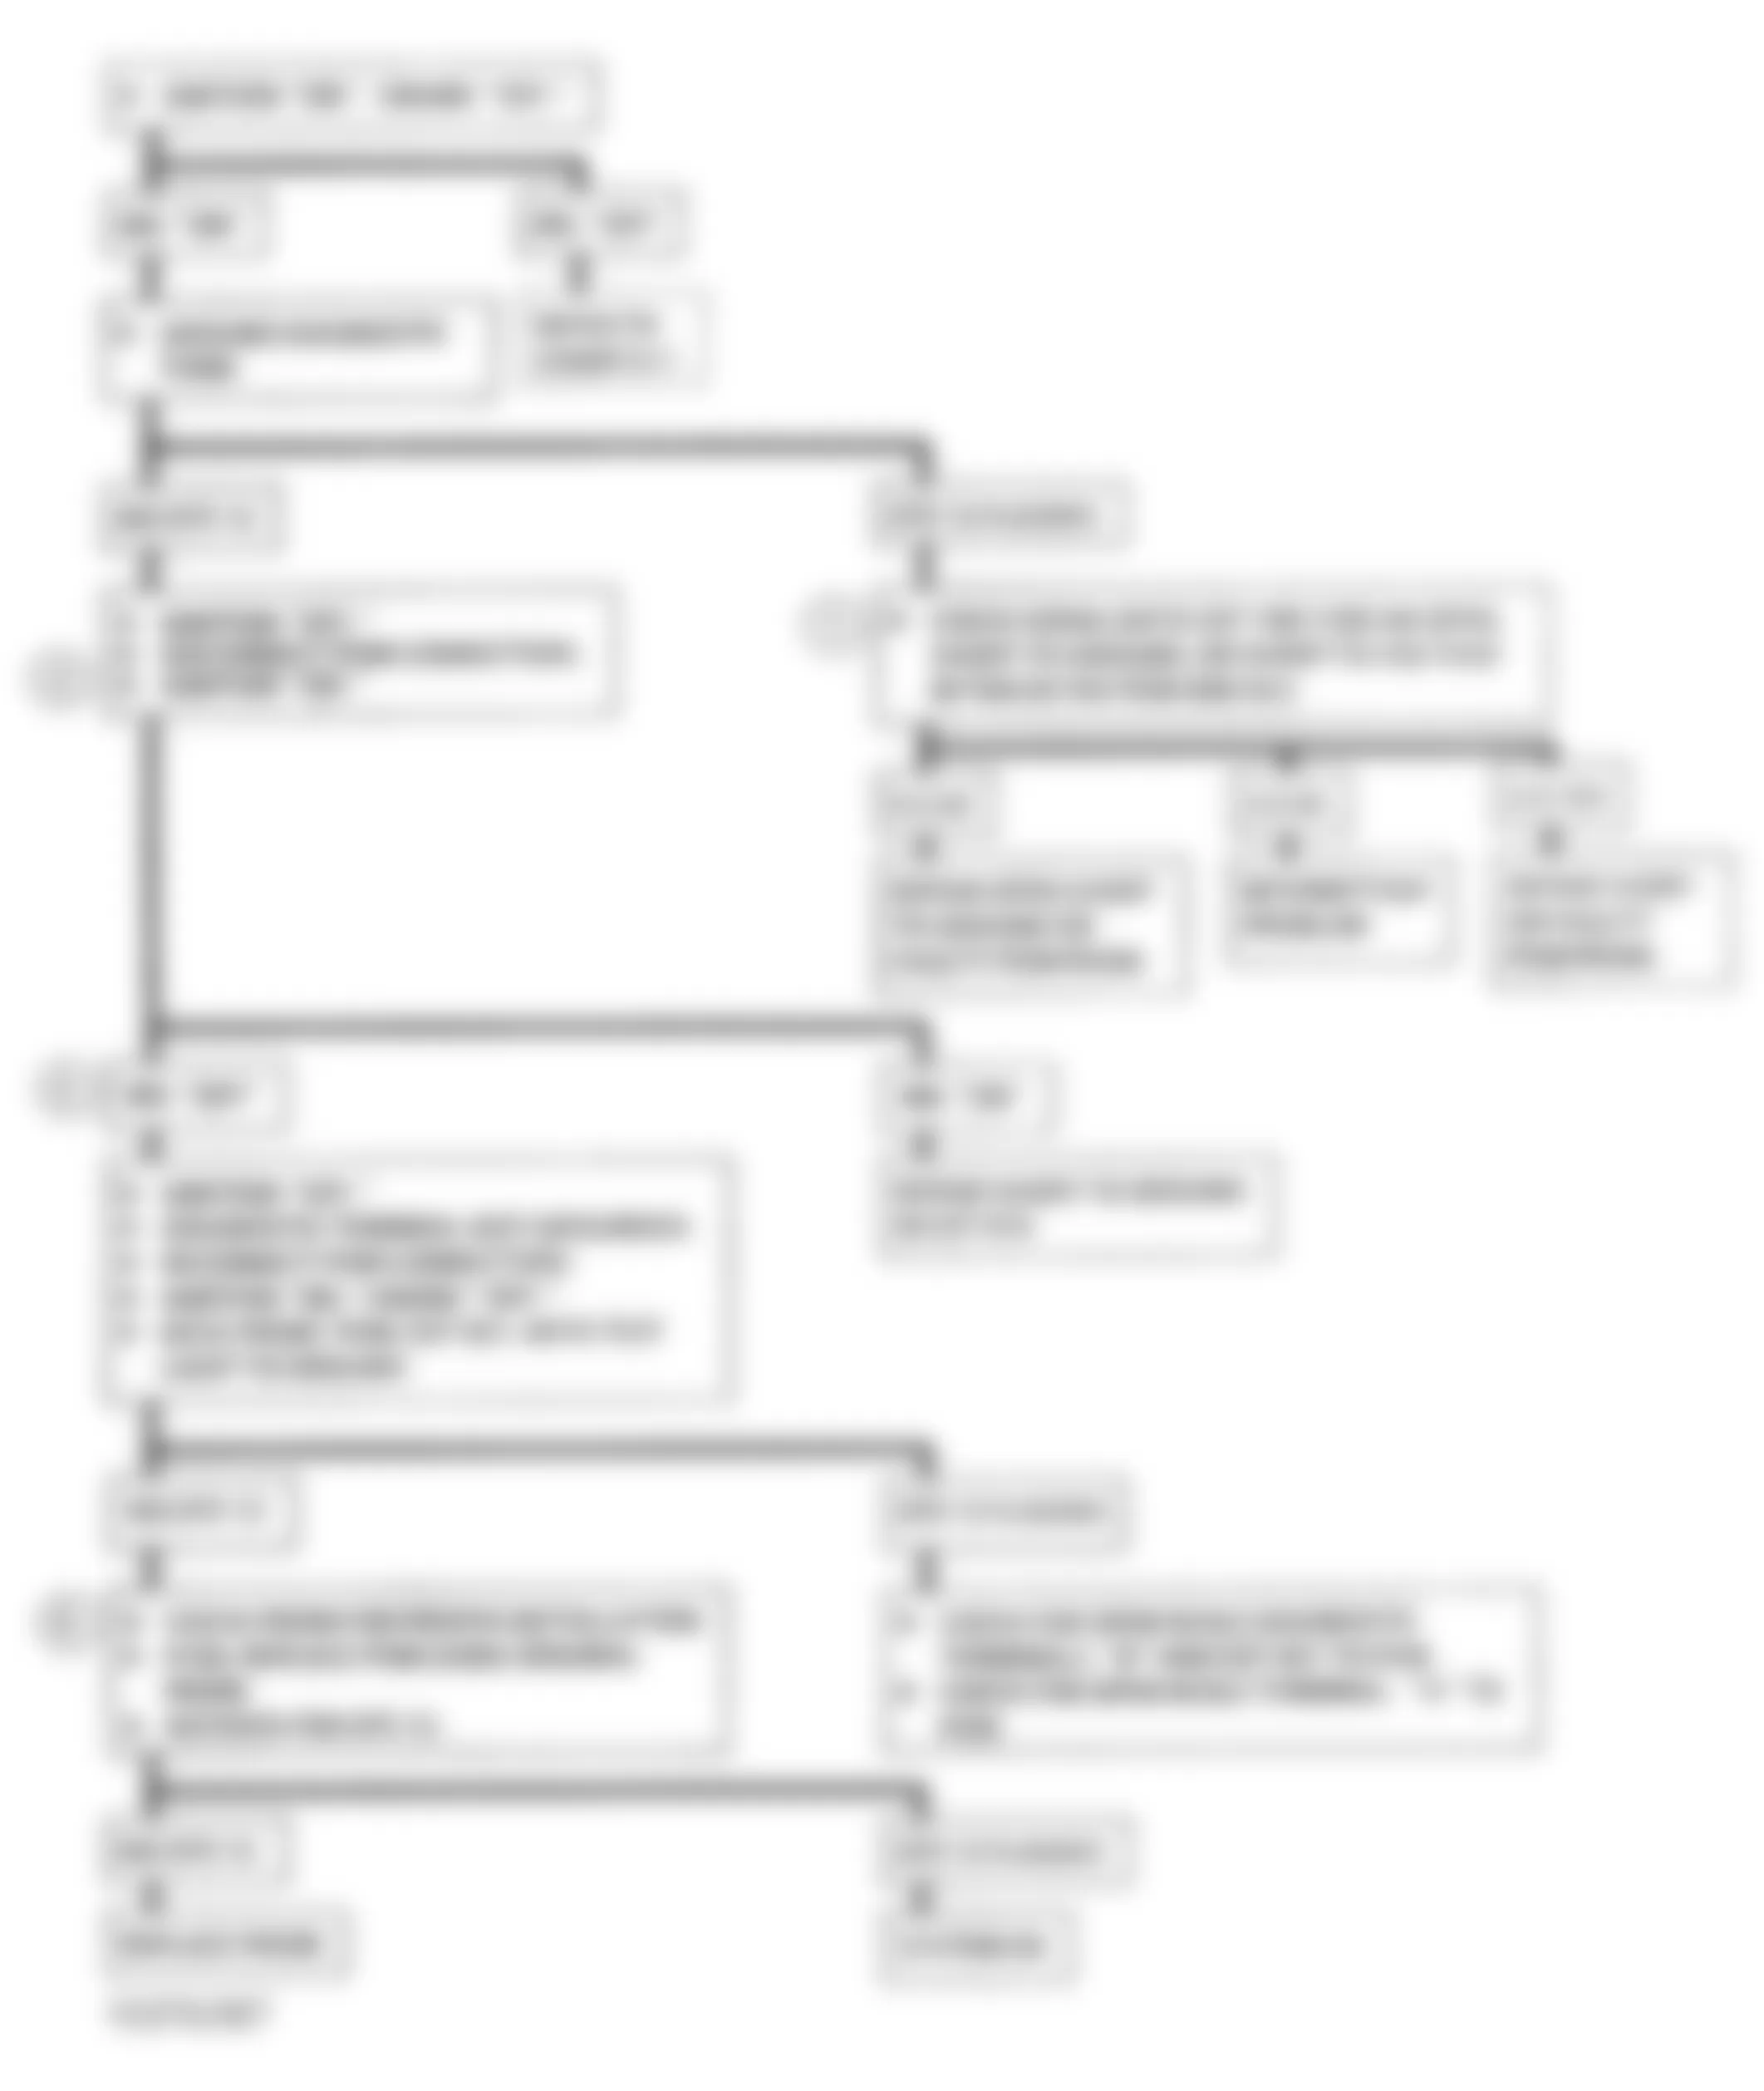 Chevrolet Pickup K2500 1993 - Component Locations -  A-2, Flowchart, No DLC Data, MIL On All Time - A/T